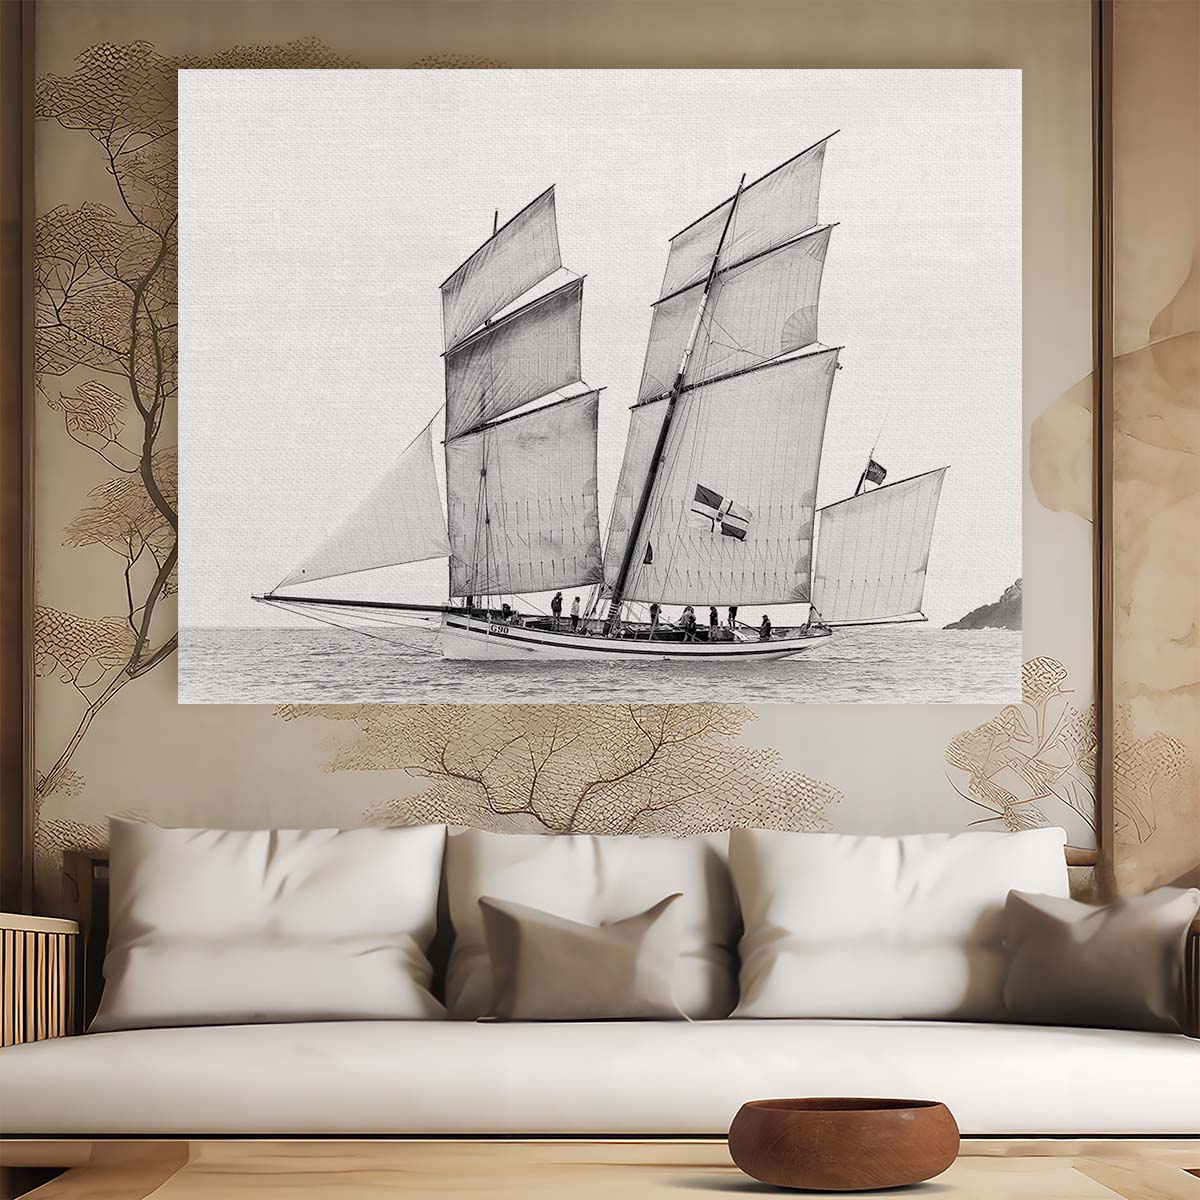 Monochrome Maritime Seascape Sailing Ship Wall Art by Luxuriance Designs. Made in USA.